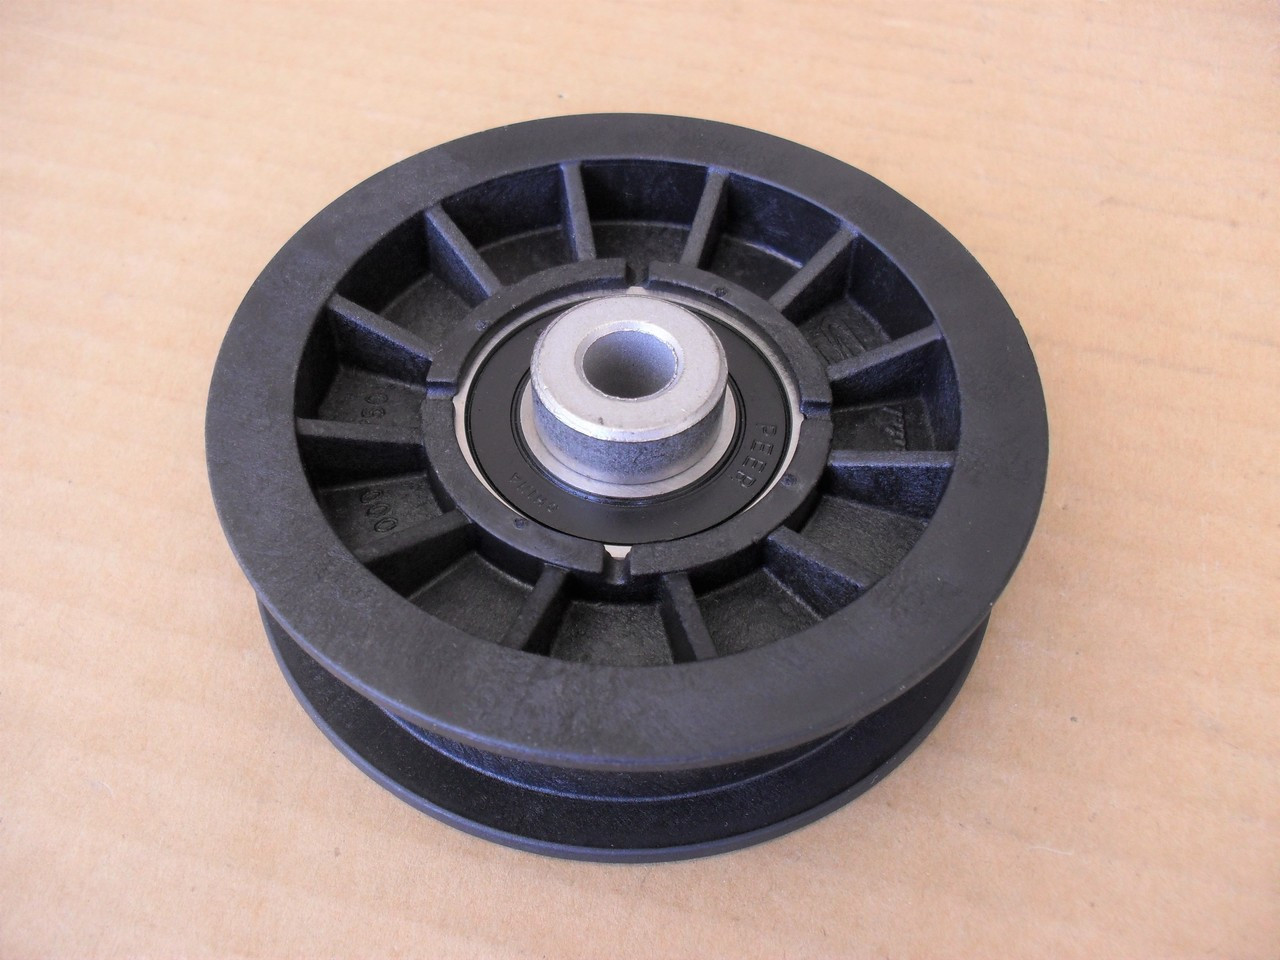 Idler Pulley for Bluebird, 539110311 539-110311 ID: 3/8" OD: 3-1/2" Height: 1"